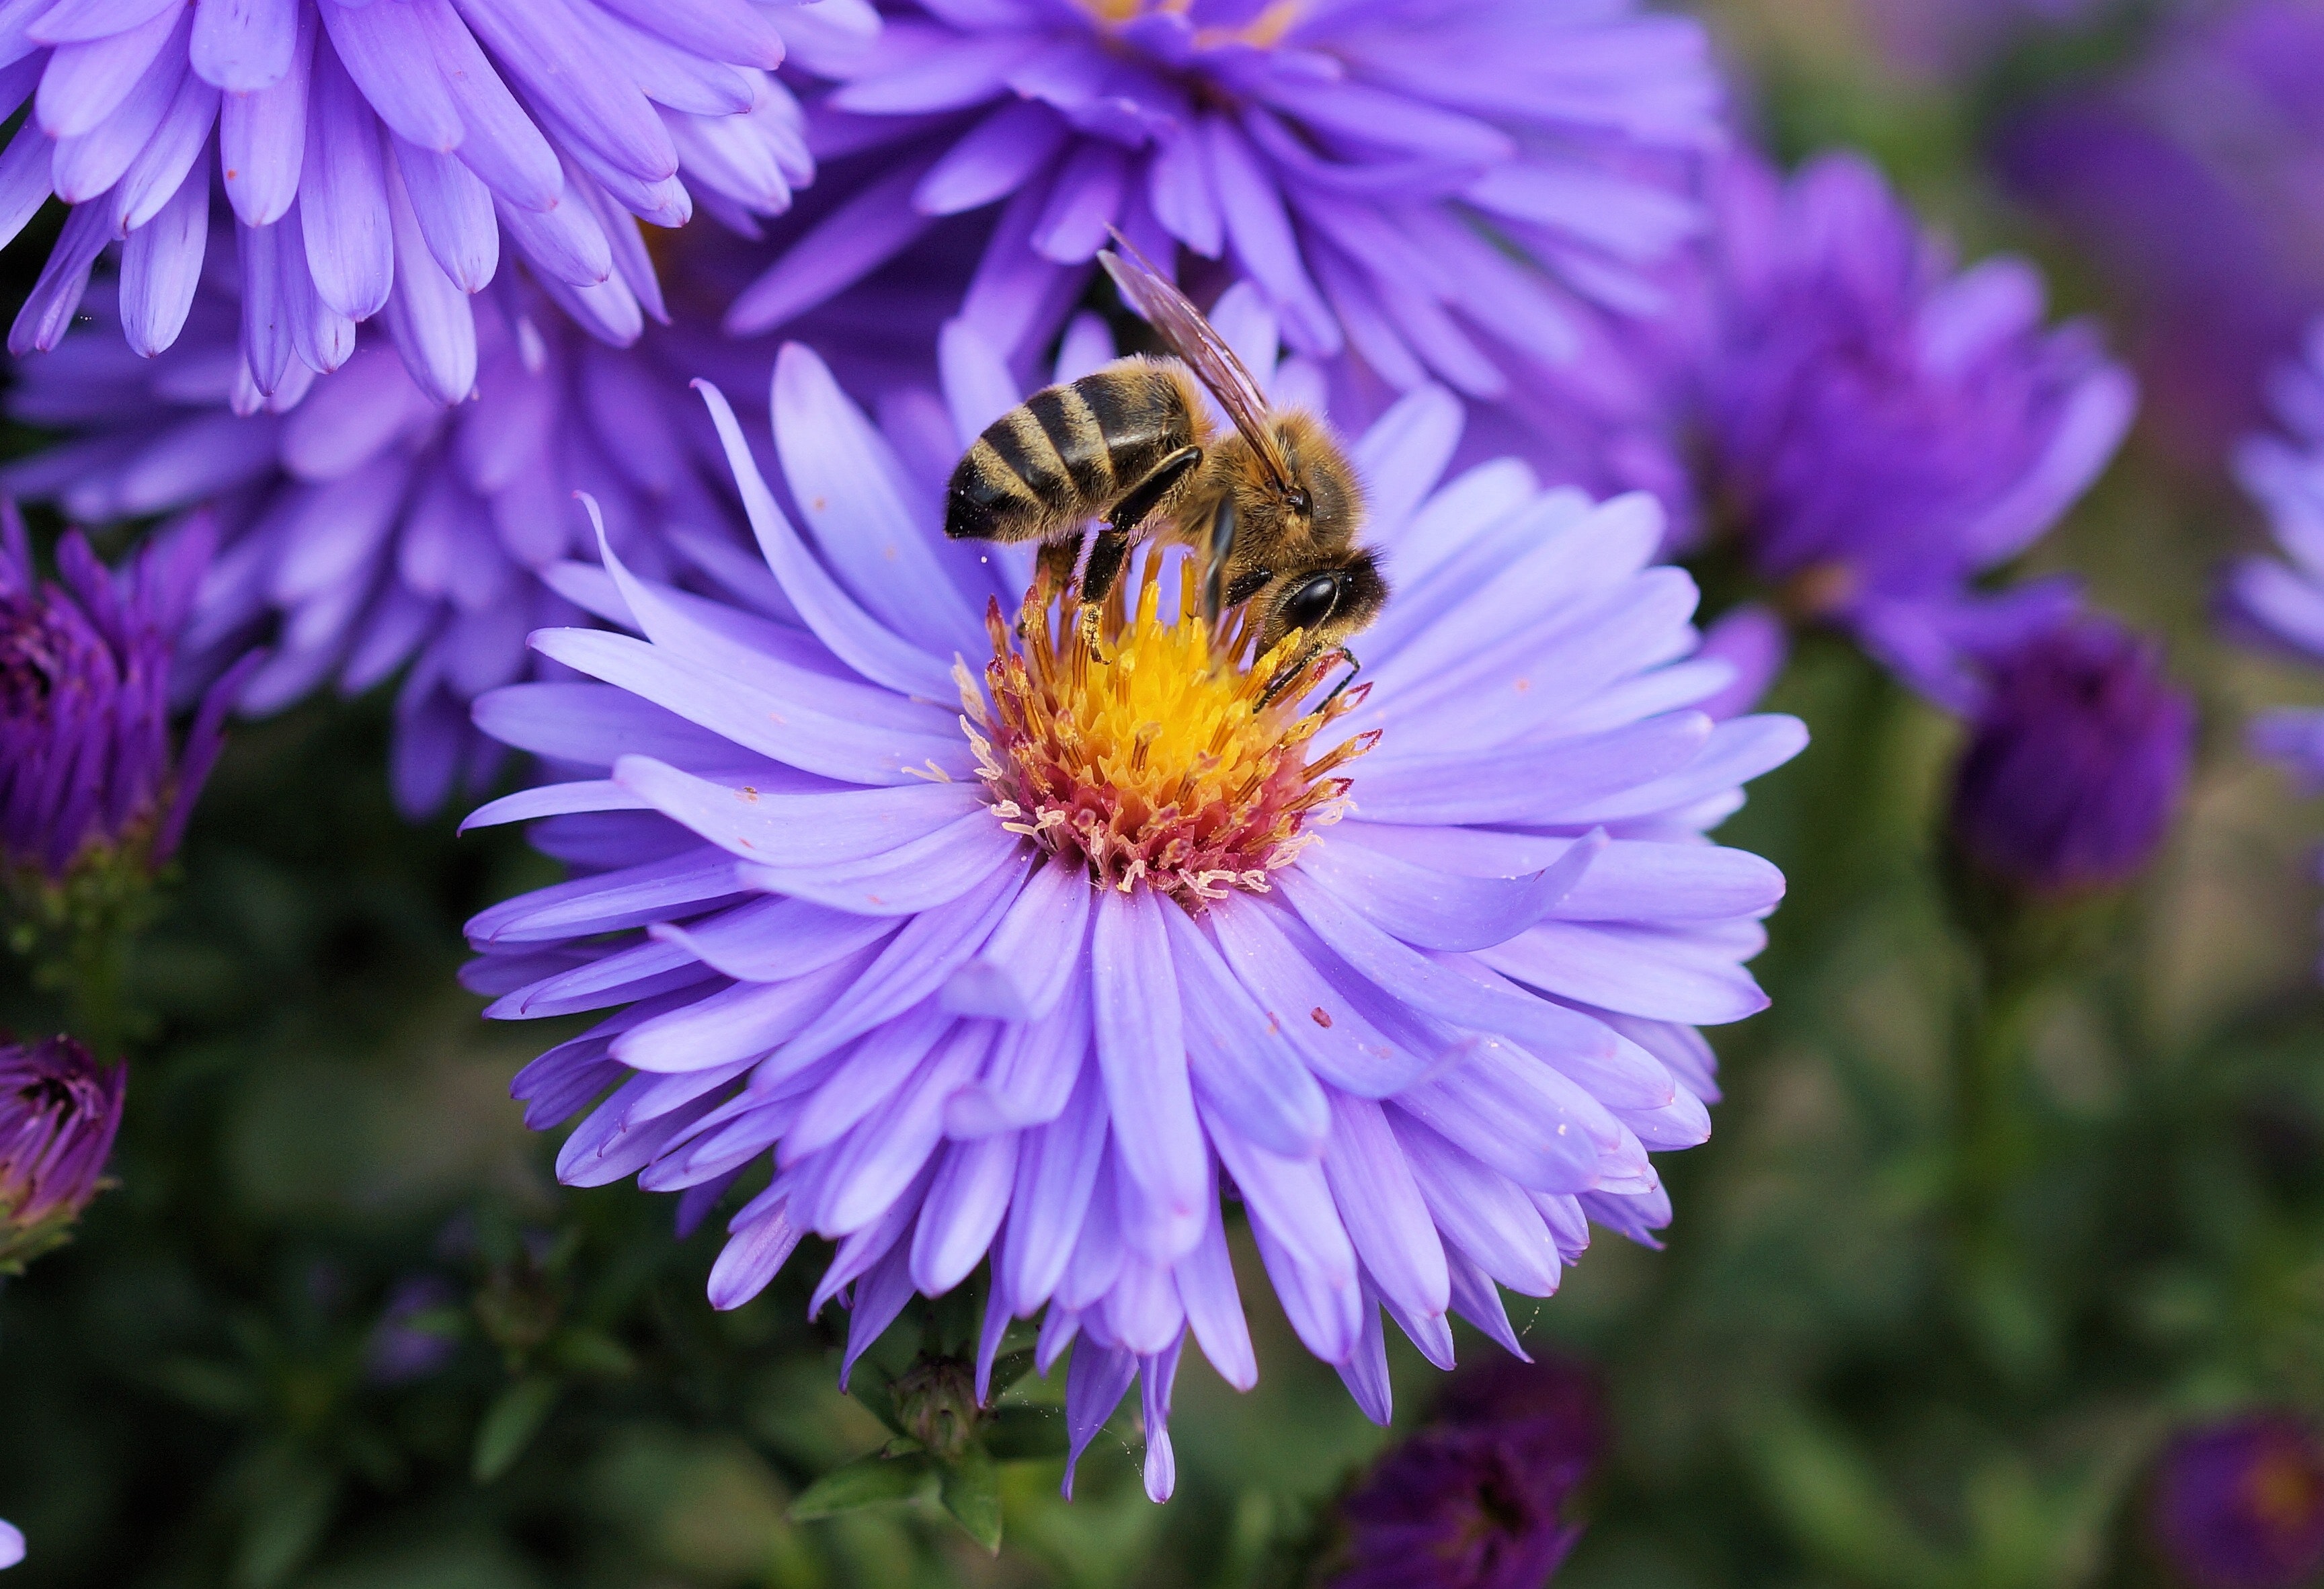 A honey bee on the purple flower of a New York aster